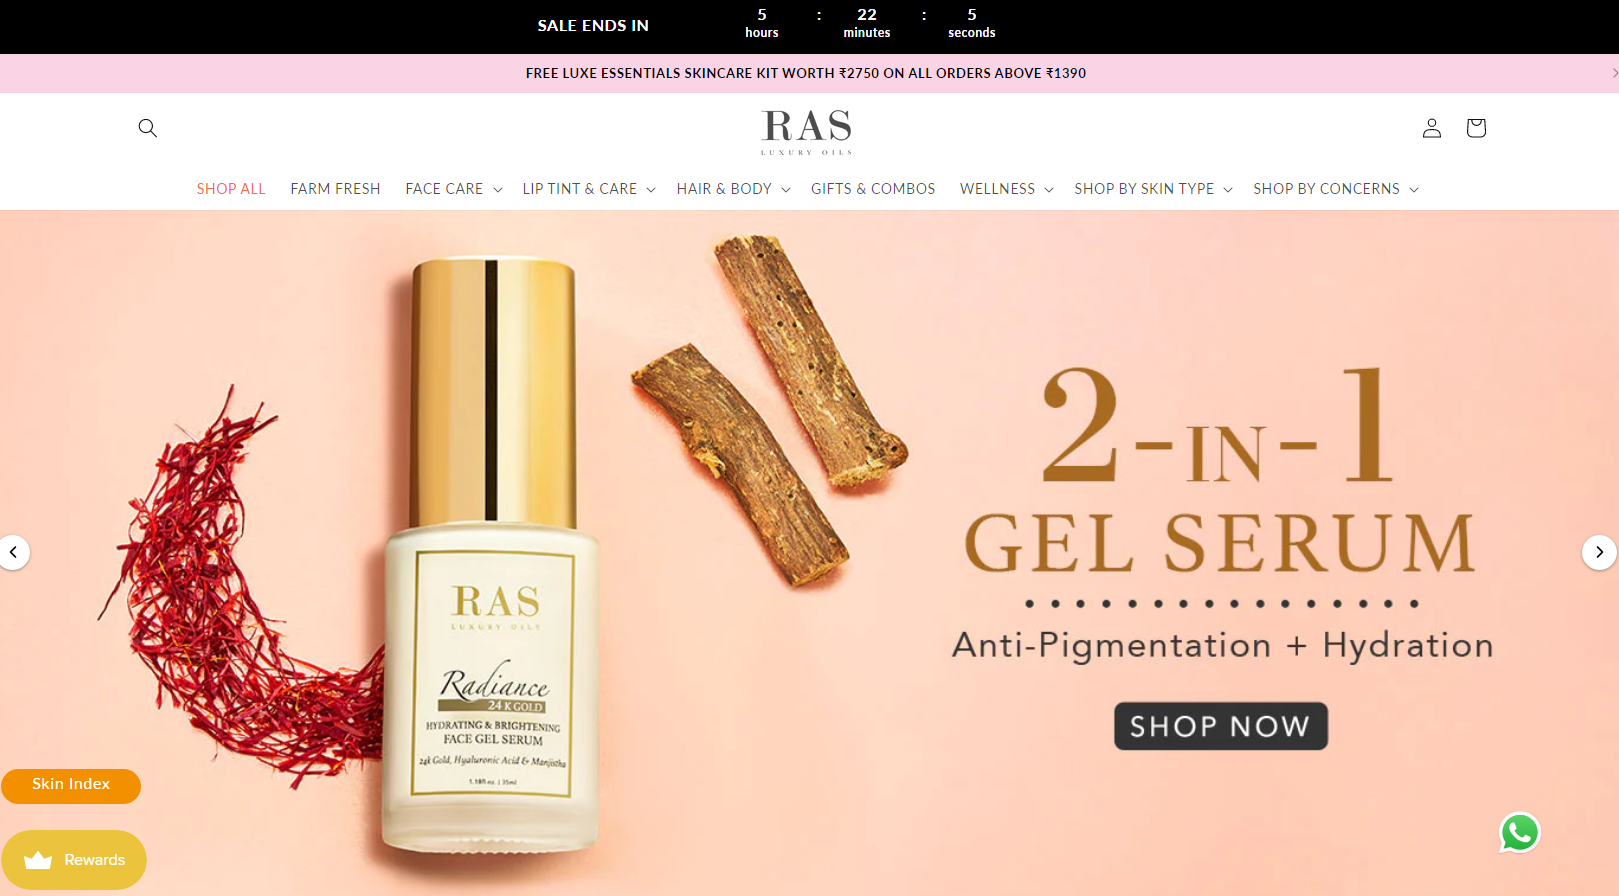 RAS Luxury Oils Raises $1.5M In A Funding Round Led By Green Frontier Capital.